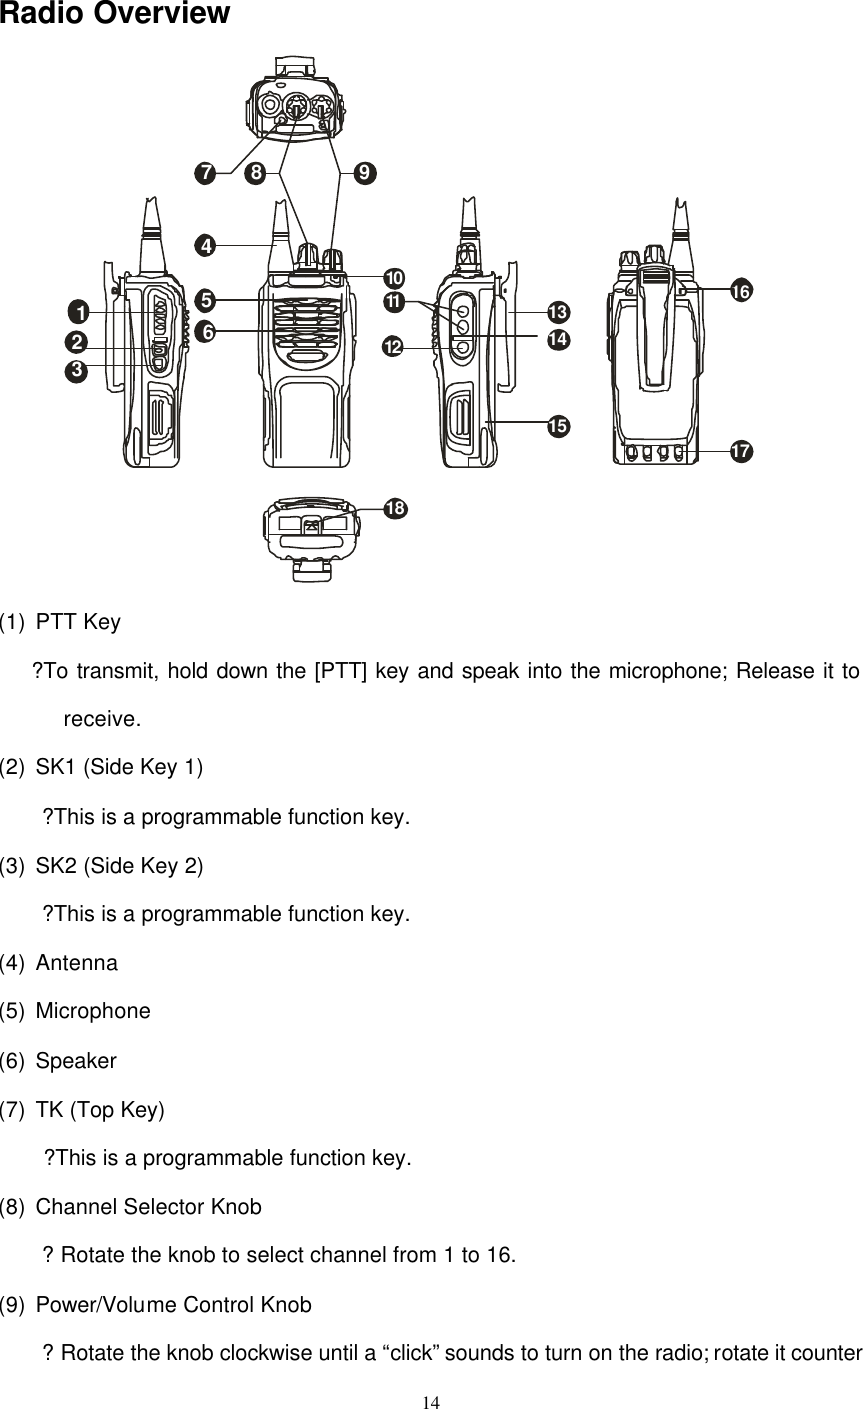  14  Radio Overview   1234567 8 910131411 161812171415 (1) PTT Key     ?To transmit, hold down the [PTT] key and speak into the microphone; Release it to receive. (2) SK1 (Side Key 1) ?This is a programmable function key. (3) SK2 (Side Key 2) ?This is a programmable function key. (4) Antenna (5) Microphone (6) Speaker (7) TK (Top Key) ?This is a programmable function key. (8) Channel Selector Knob ? Rotate the knob to select channel from 1 to 16. (9) Power/Volume Control Knob     ? Rotate the knob clockwise until a “click” sounds to turn on the radio; rotate it counter 